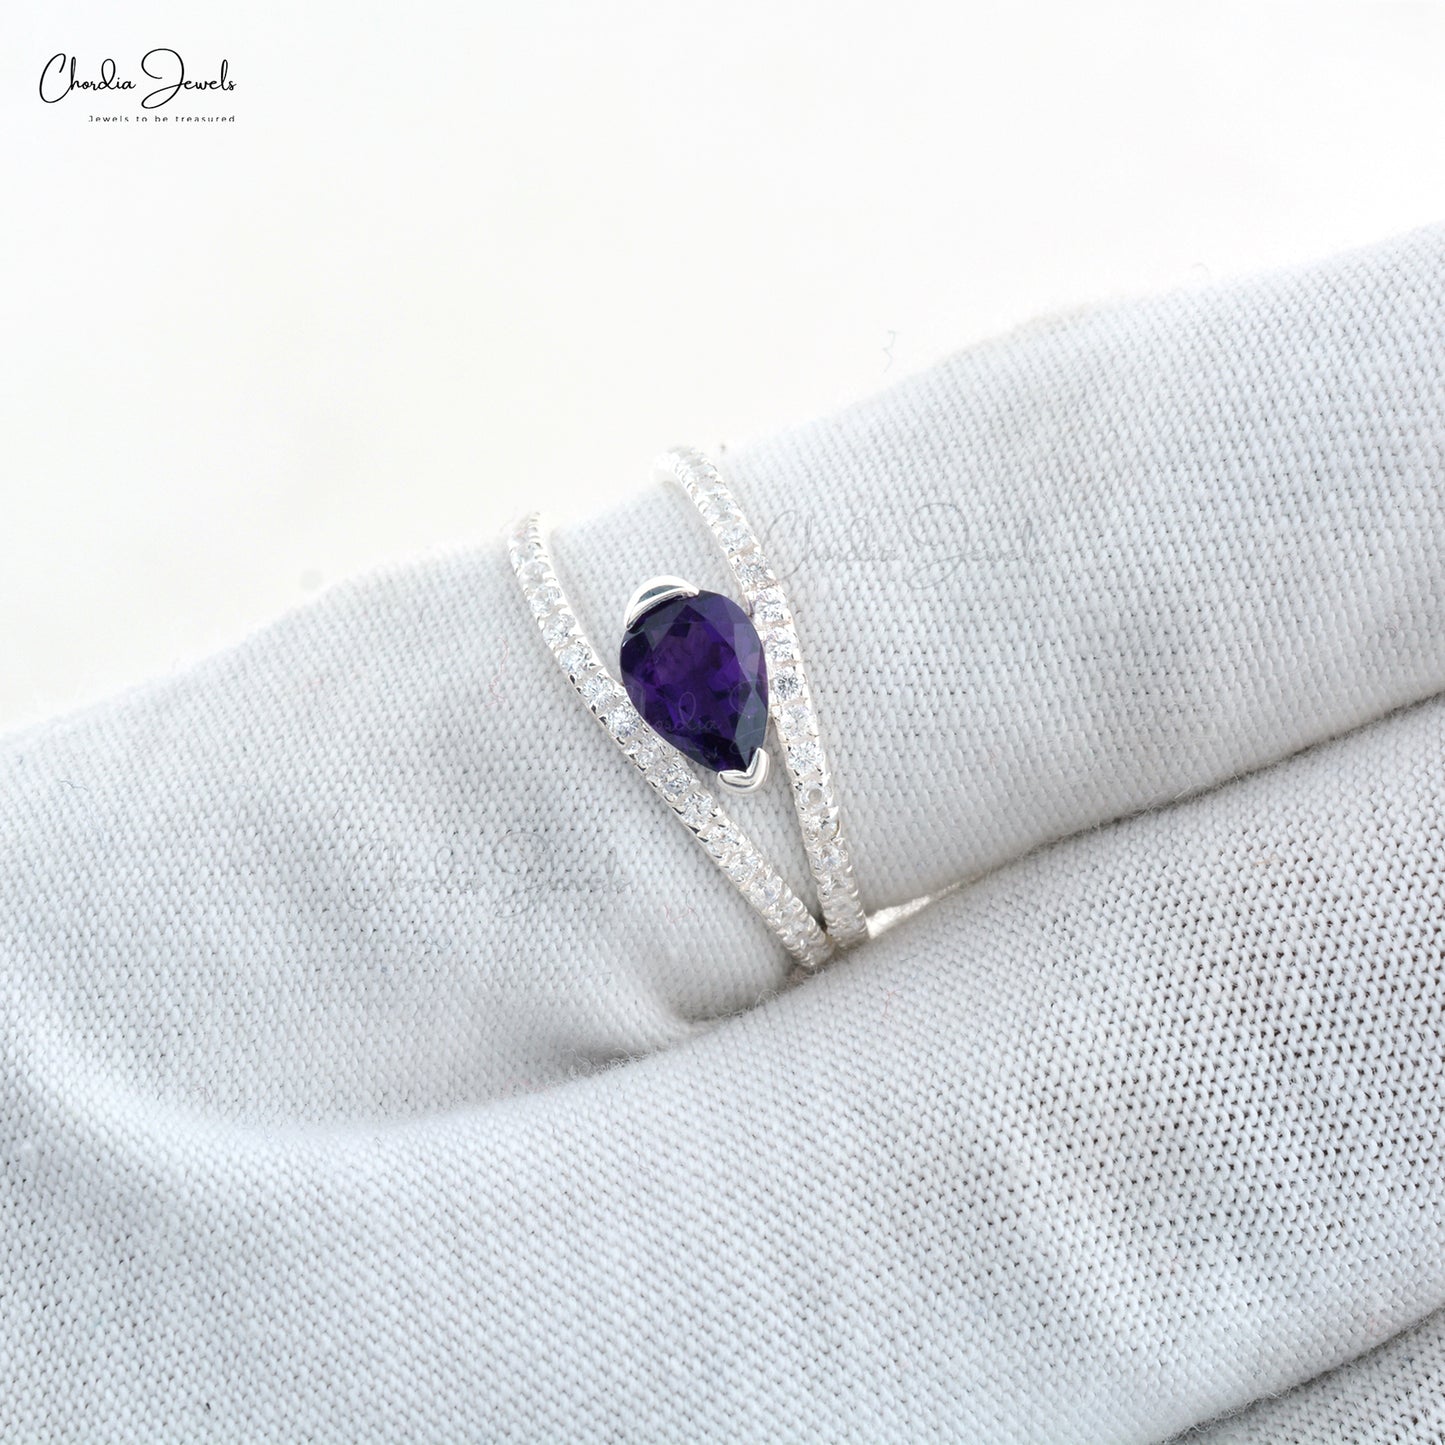 Load image into Gallery viewer, High-Quality 925 Sterling Silver 7x5mm Pear Amethyst Split Shank Ring For Girls Fashion Jewelry At Offer Price
